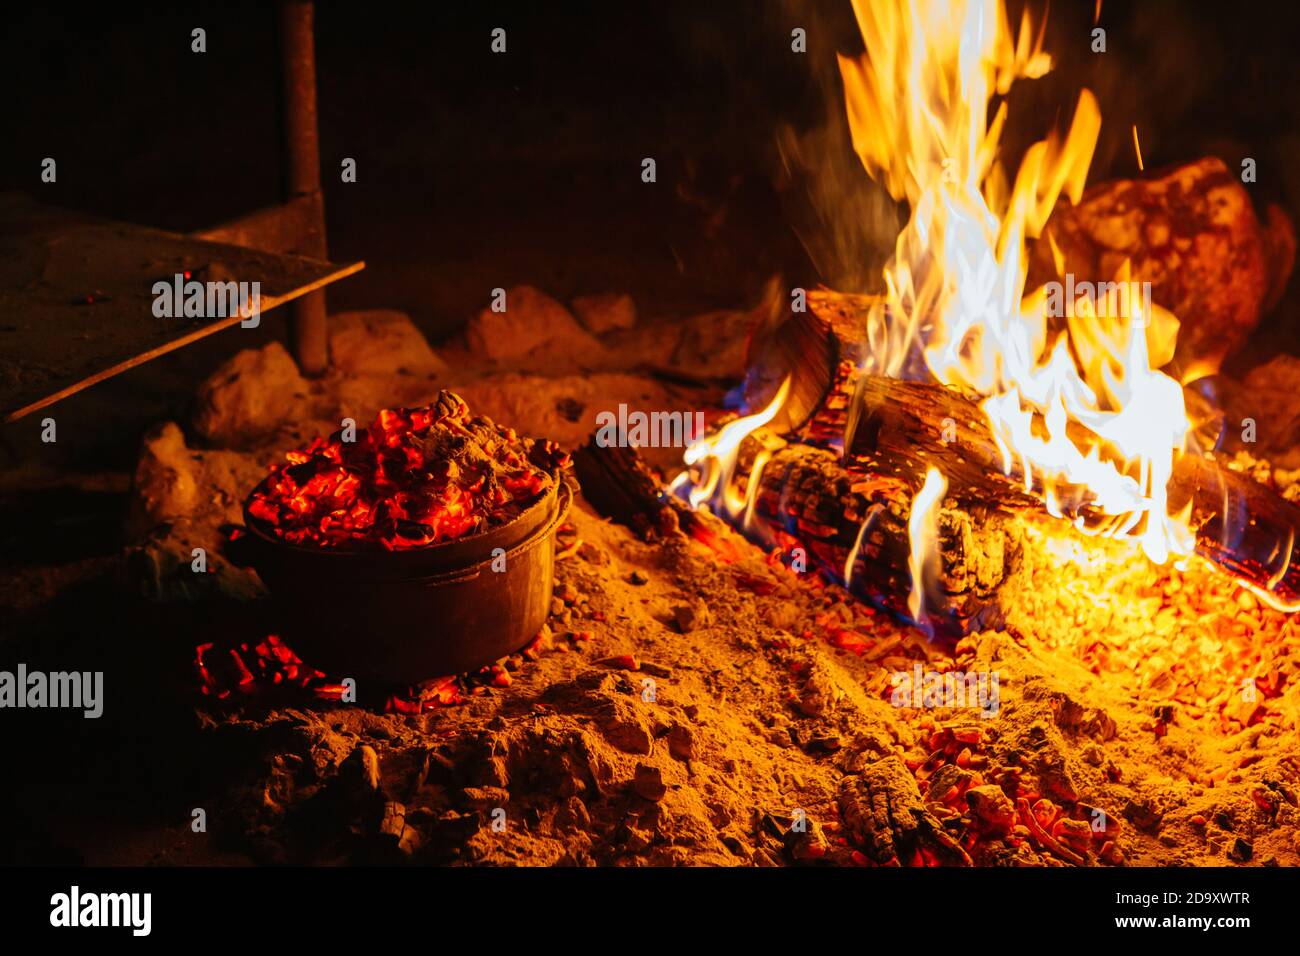 Cooking Damper on a Fire in Australia Stock Photo